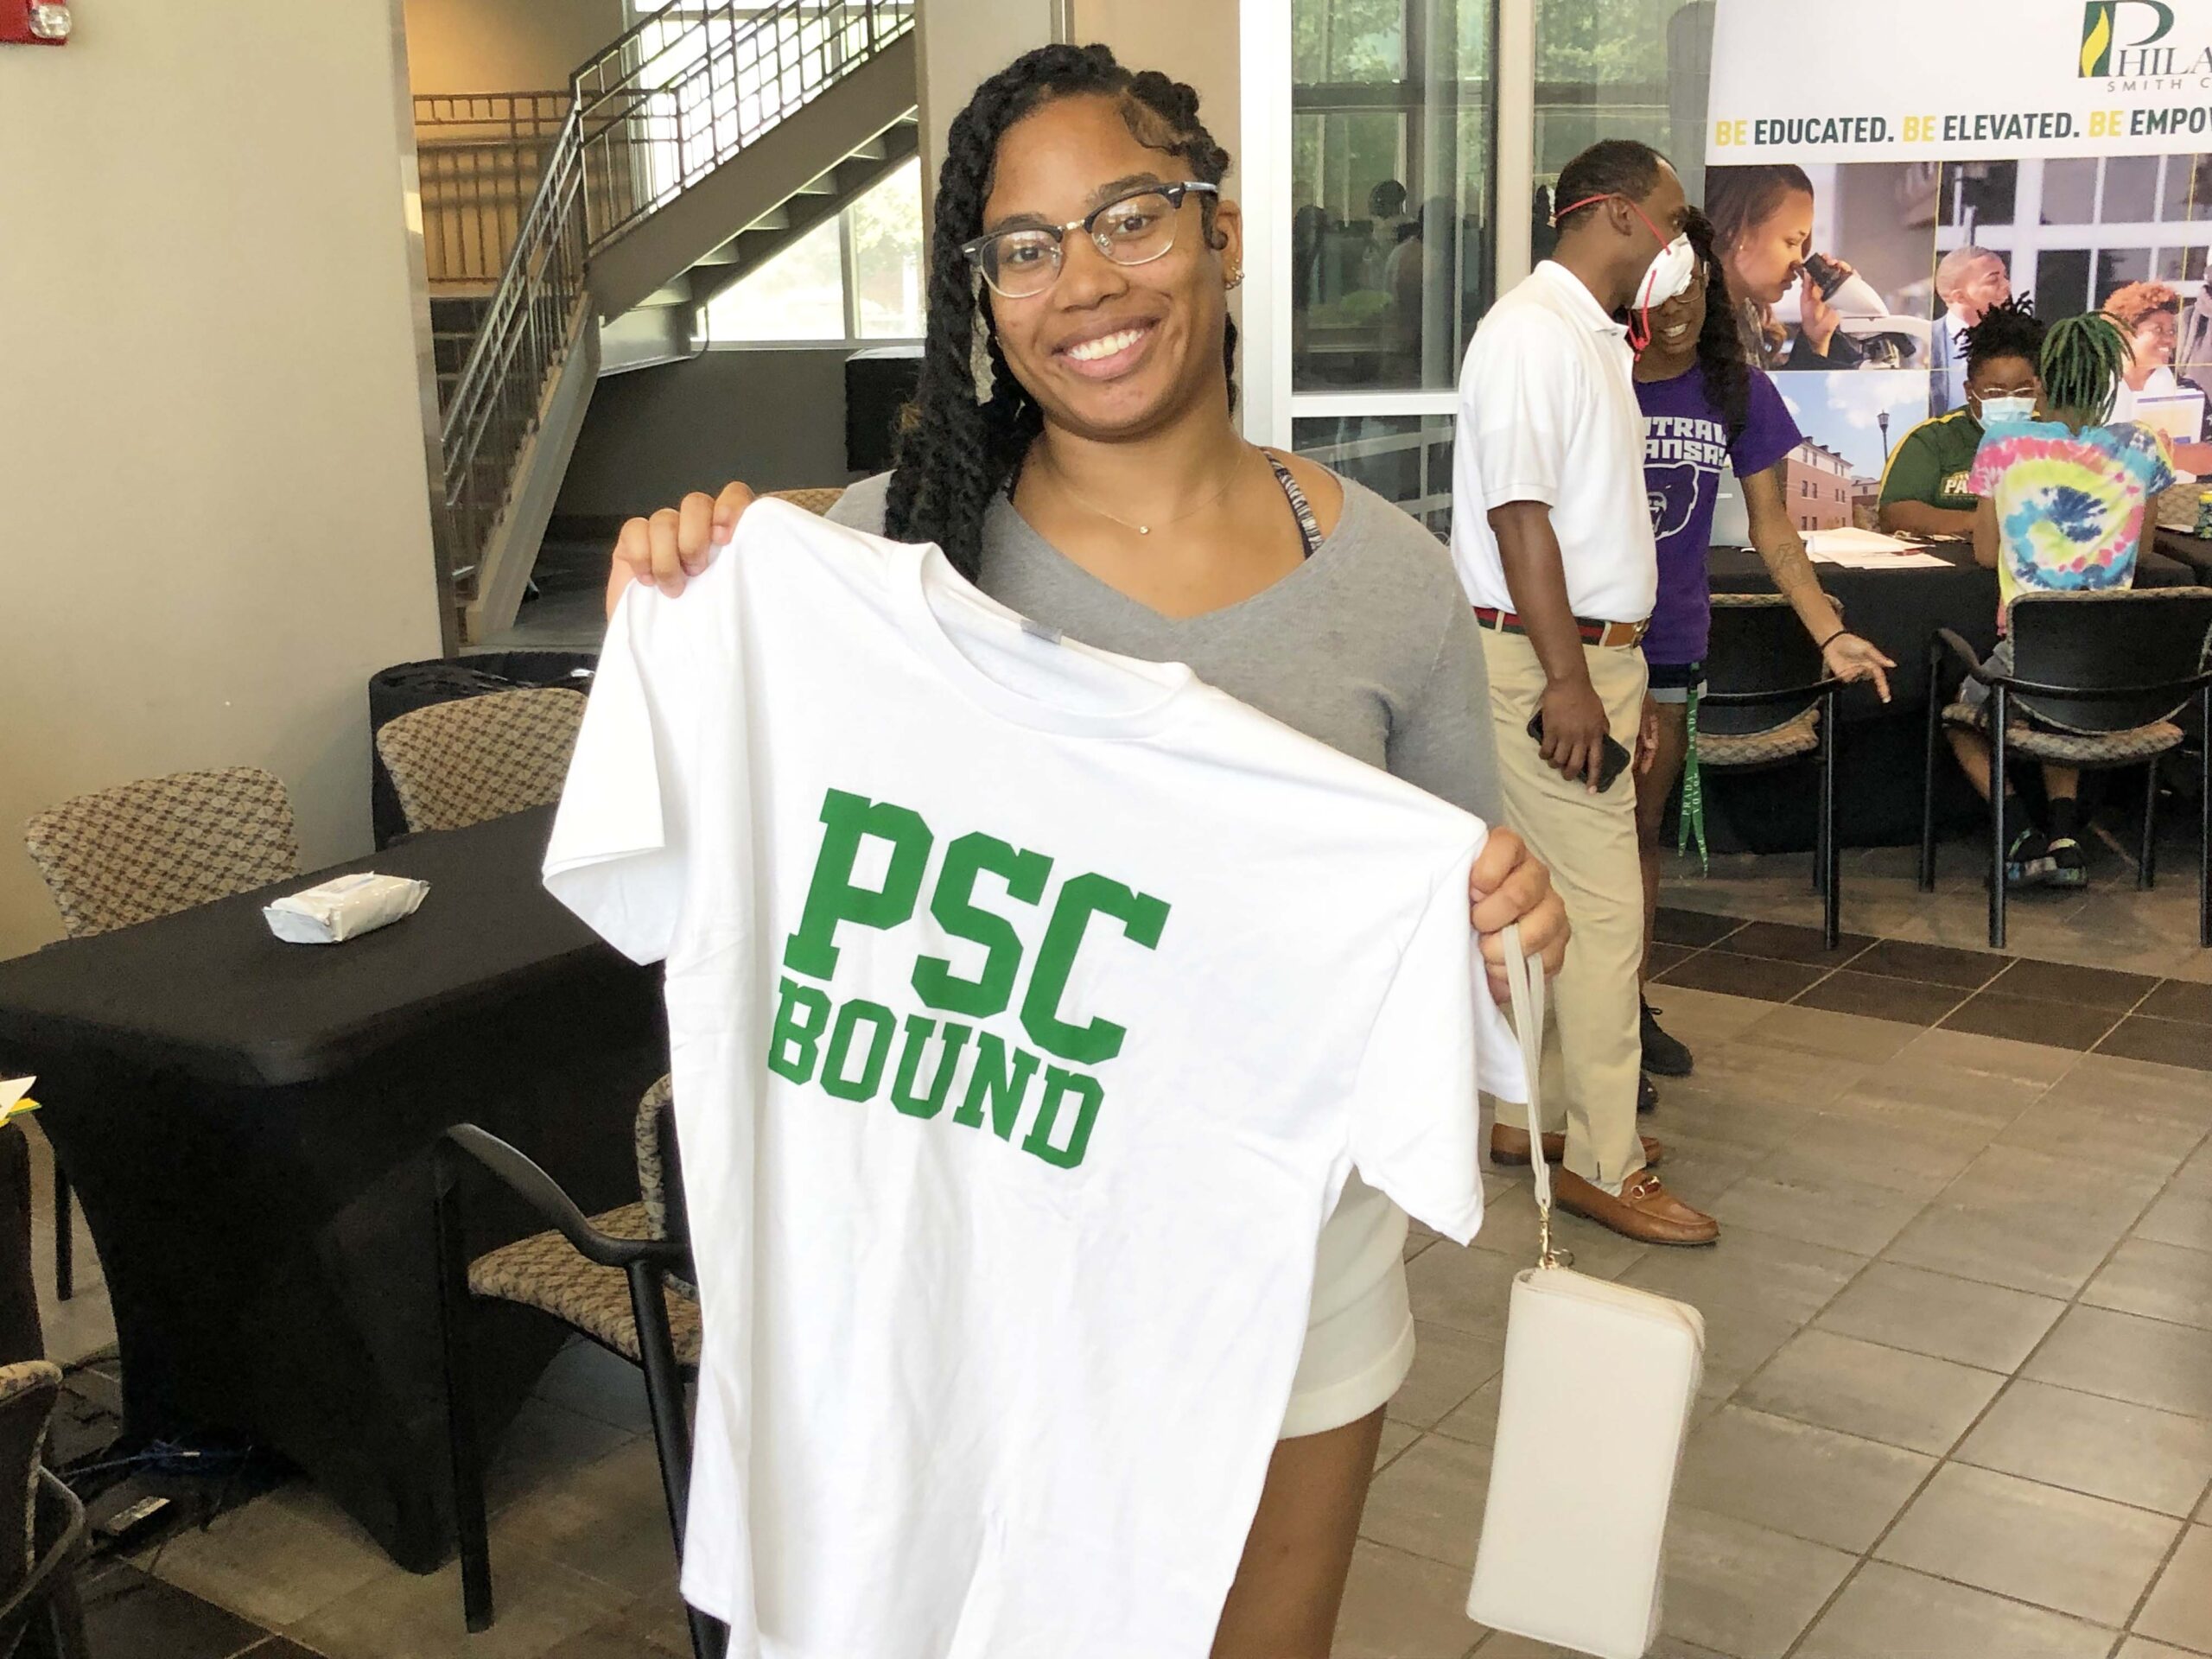 New Philander Smith College student, Amyah Mosley